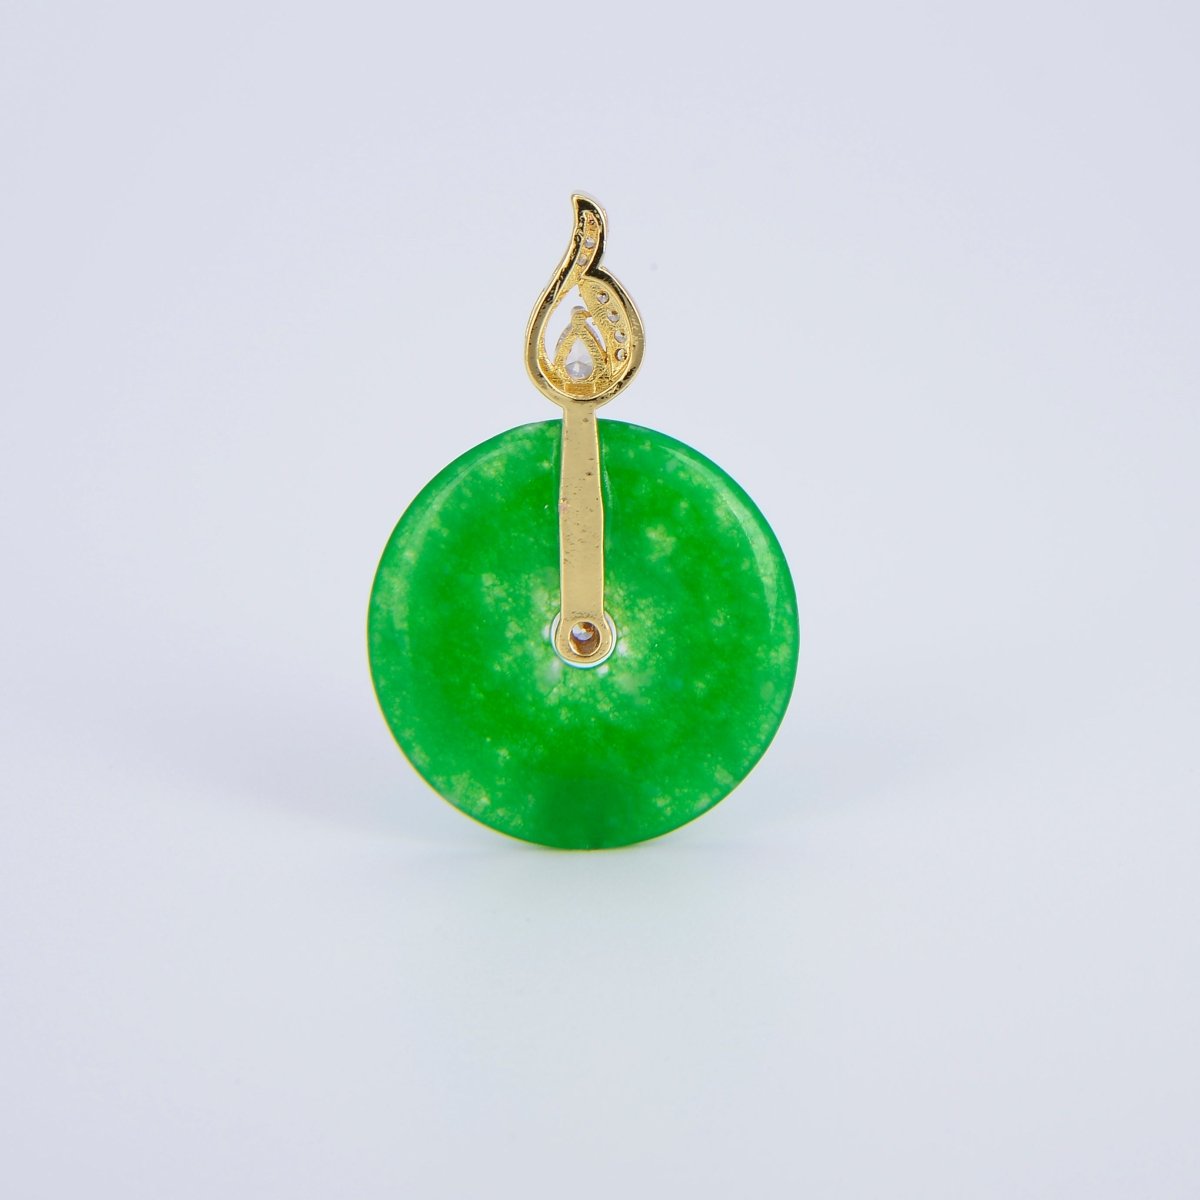 Stunning Chinese Green Donut Charm Green Jade Pendant Lucky Stone with Gold Eternity Swirl Bail for Necklace Supply O-225 - DLUXCA